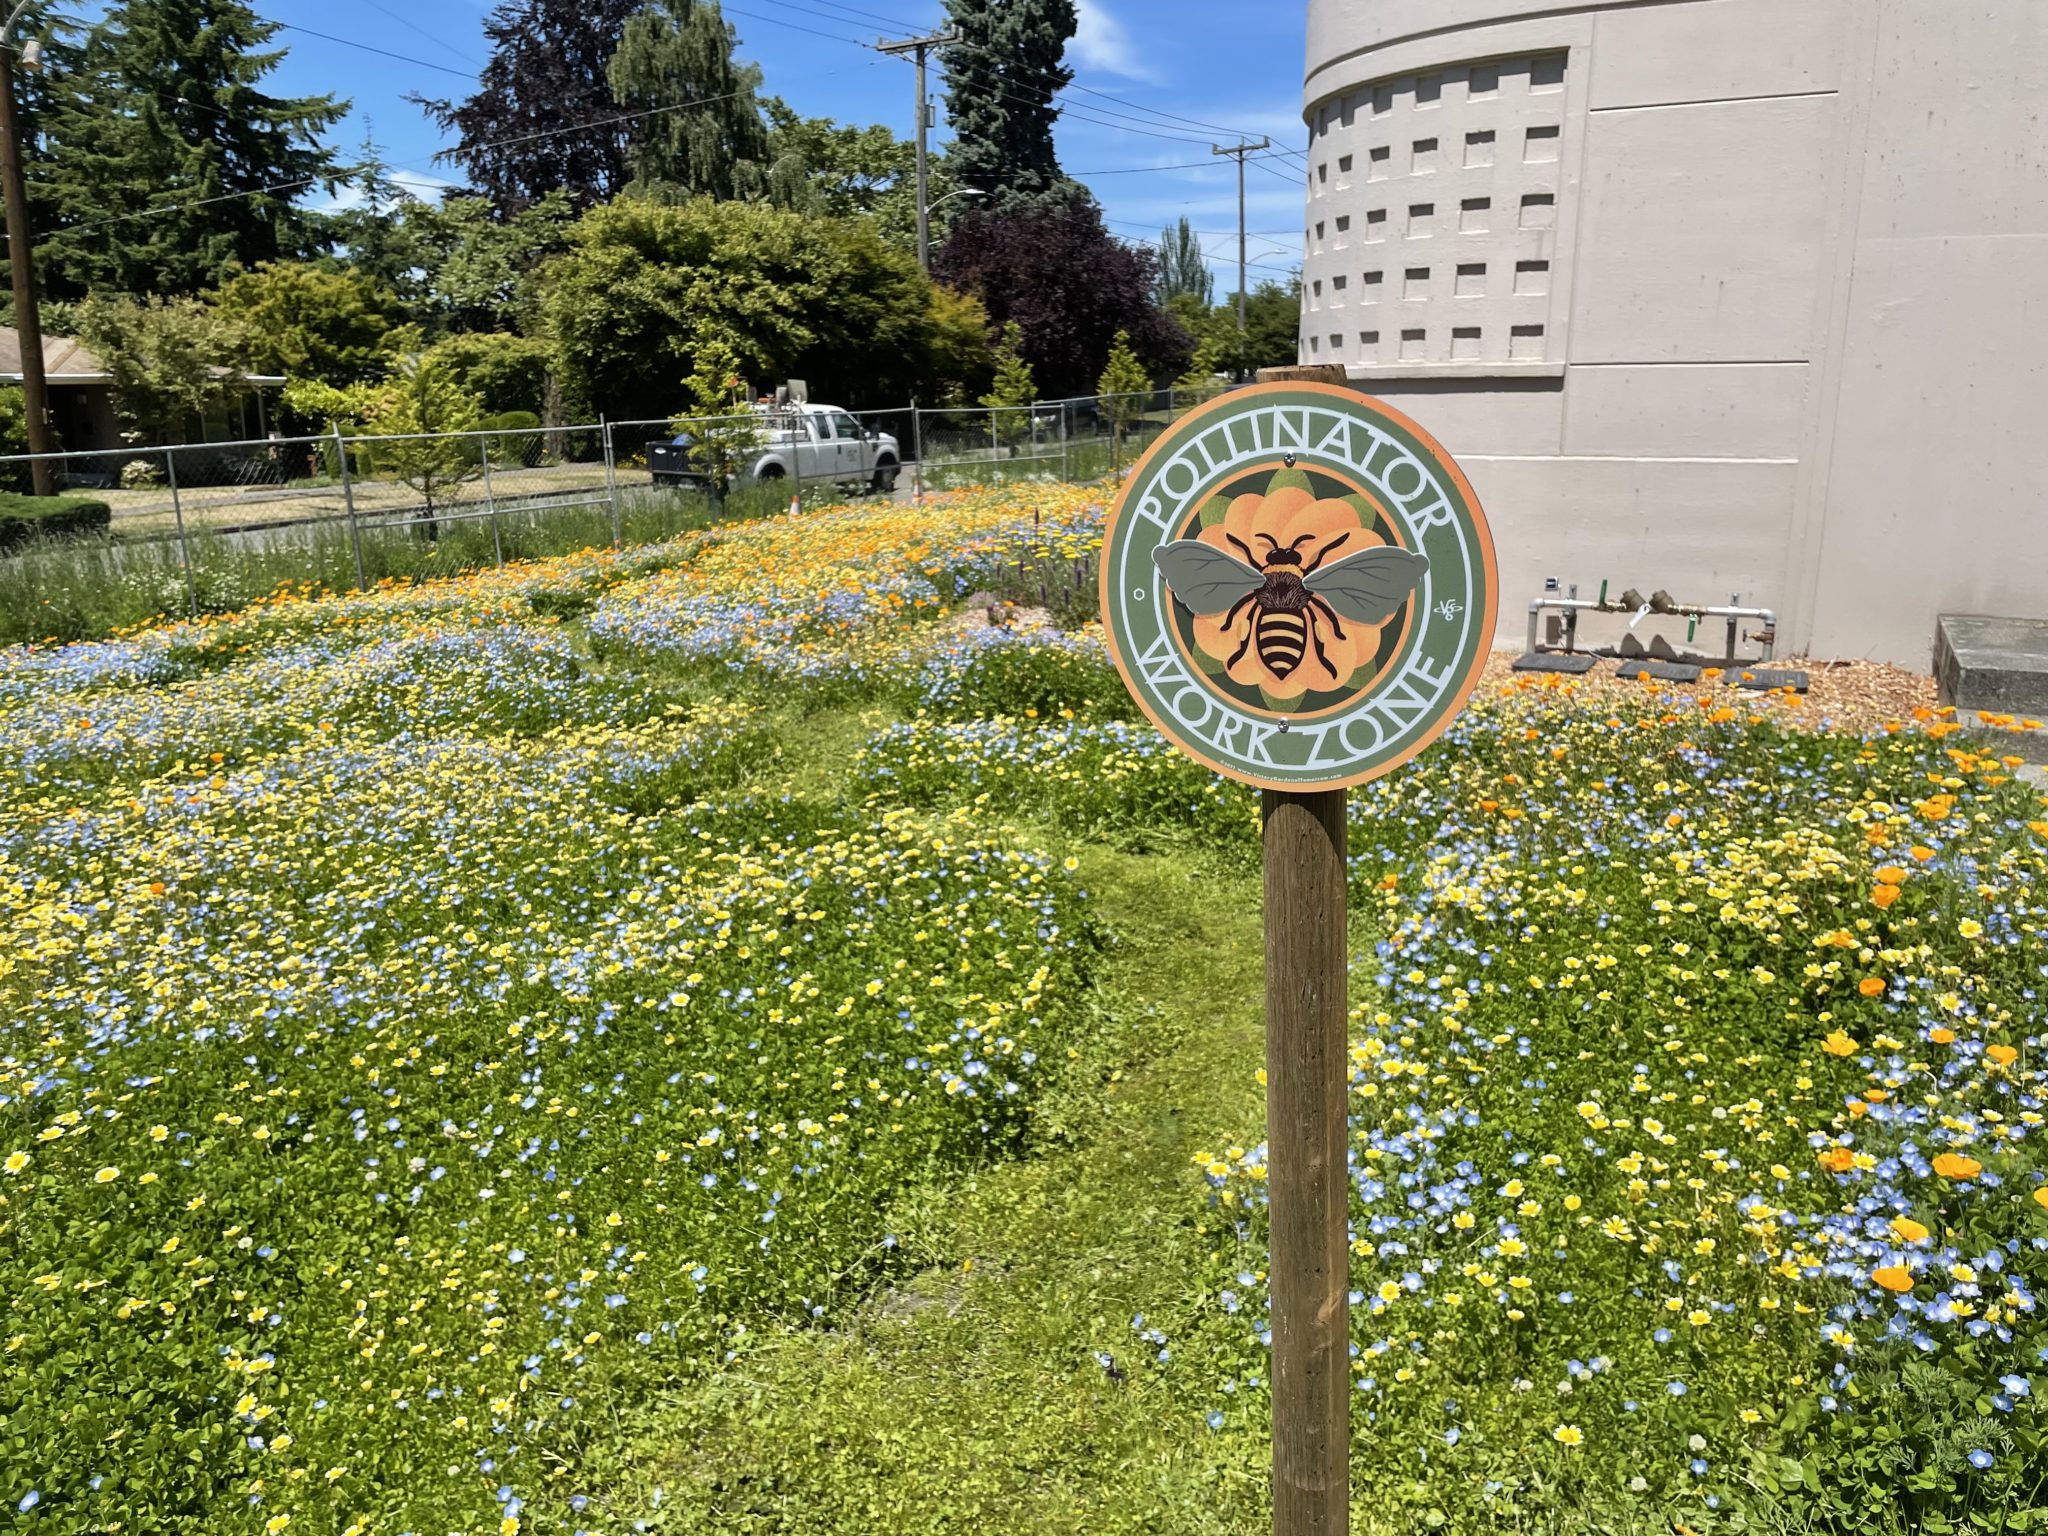 Garden of small yellow and blue flowers with a sign that reads "Pollinator Work Zone"